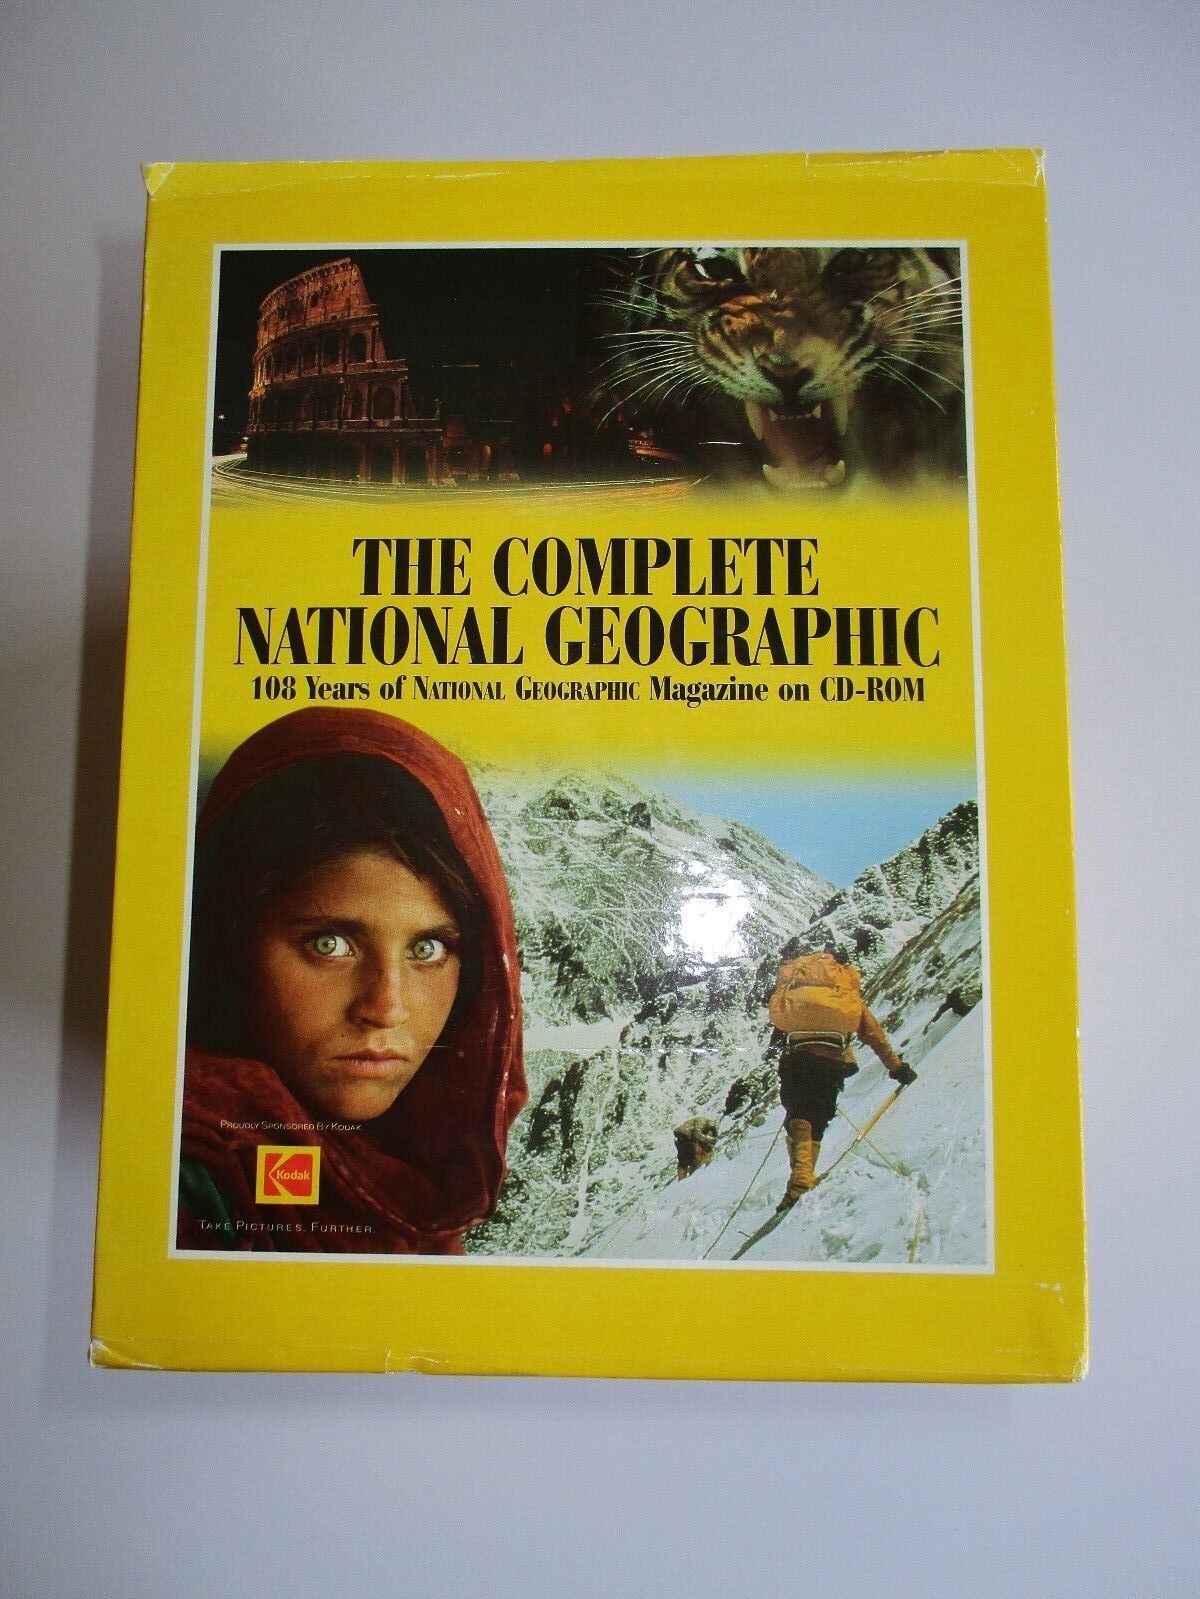 The Complete National Geographic CD-ROM for PC, Unix, Mac, Linux By Mindscape